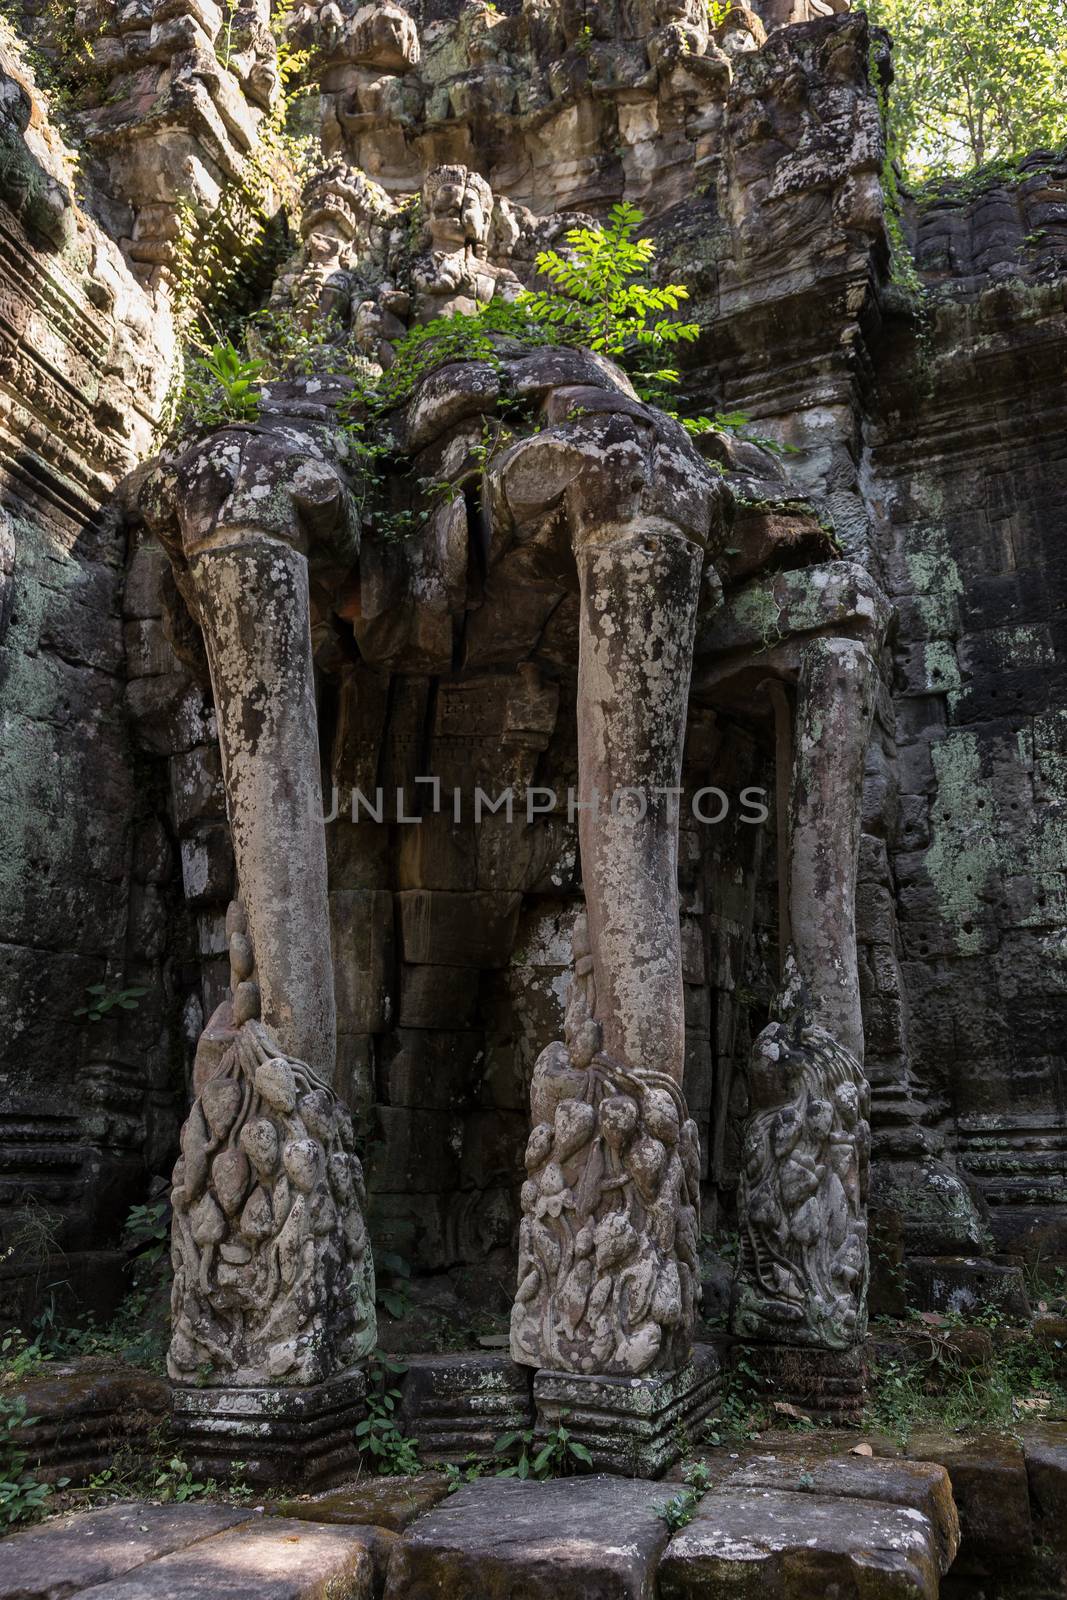 The temple complex of Angkor Watt, Cambodia, with the famous temples of Angkor, Ta Prohm and Bayon. Ancient beautiful carved structures and gateways. High quality photo